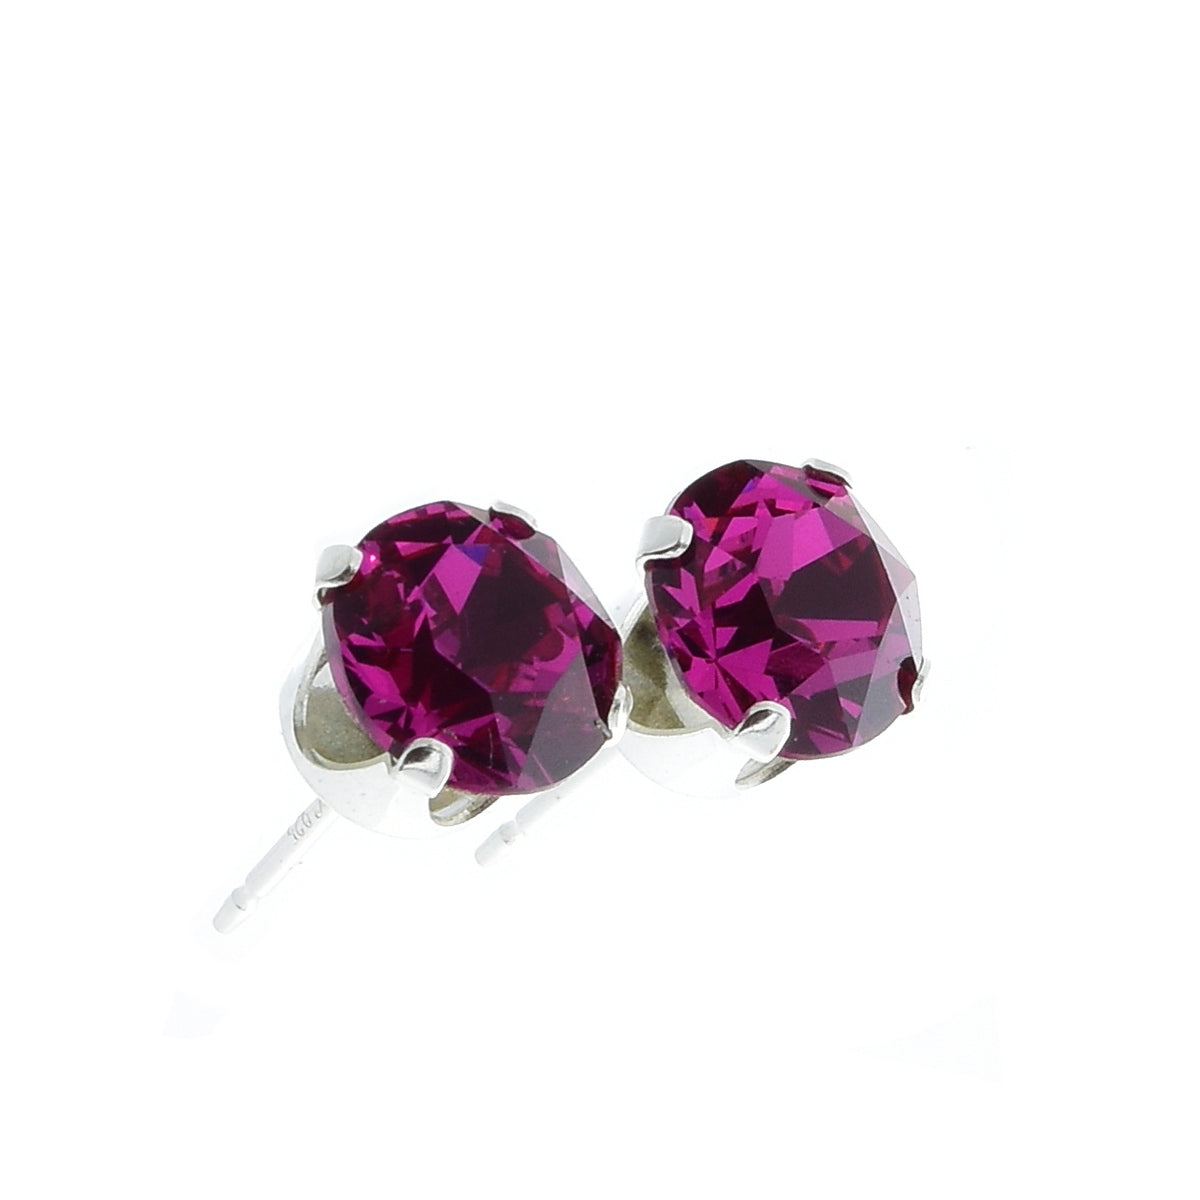 pewterhooter® Women's Classic Collection 925 Sterling silver earrings with sparkling Fuchsia crystals, packaged in a gift box for any occasion.